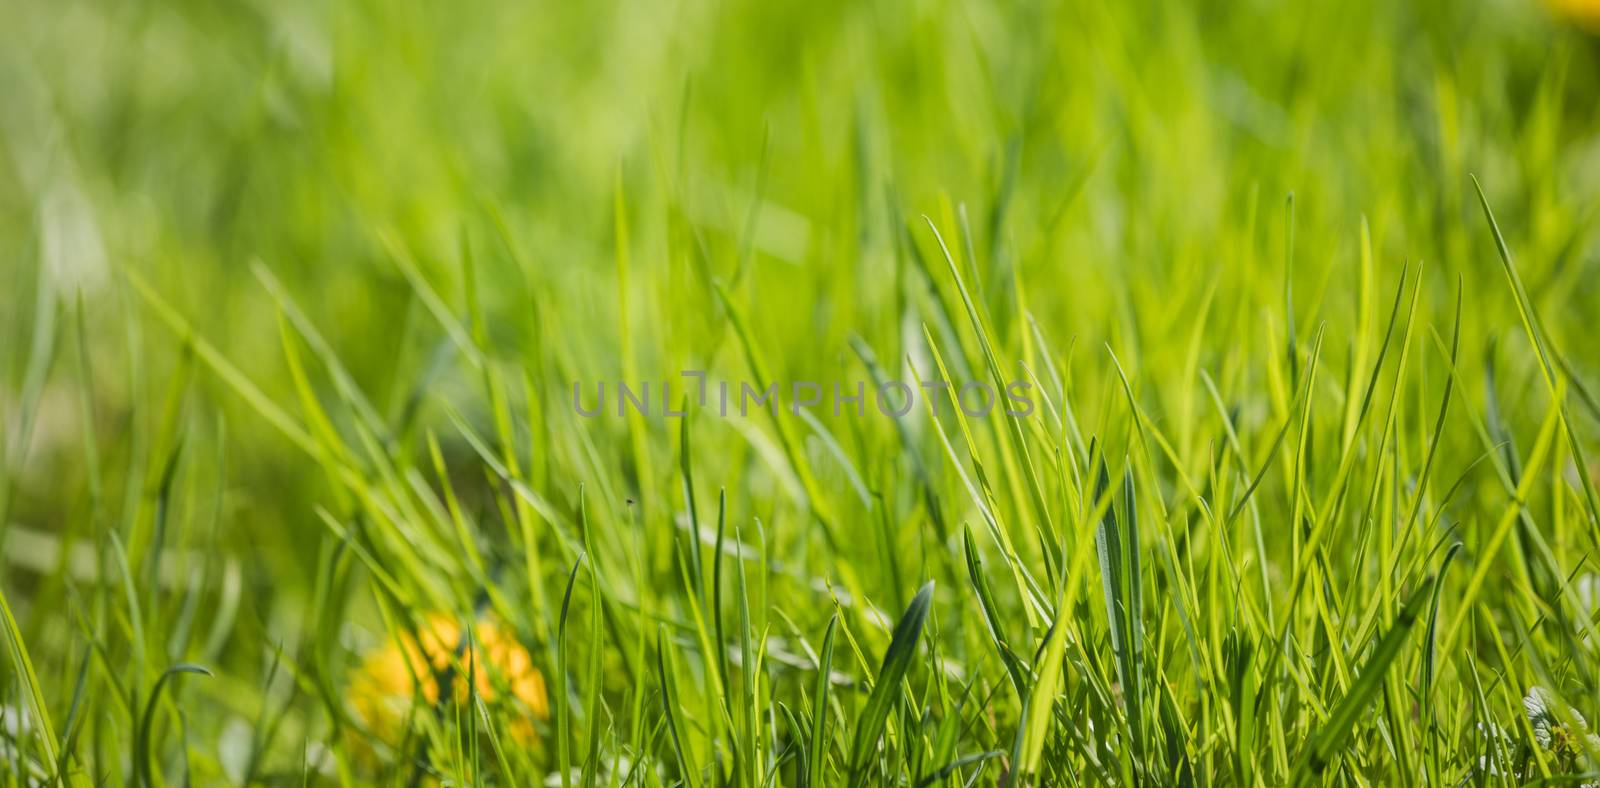 Perfect green background of fresh spring grass and yellow flower